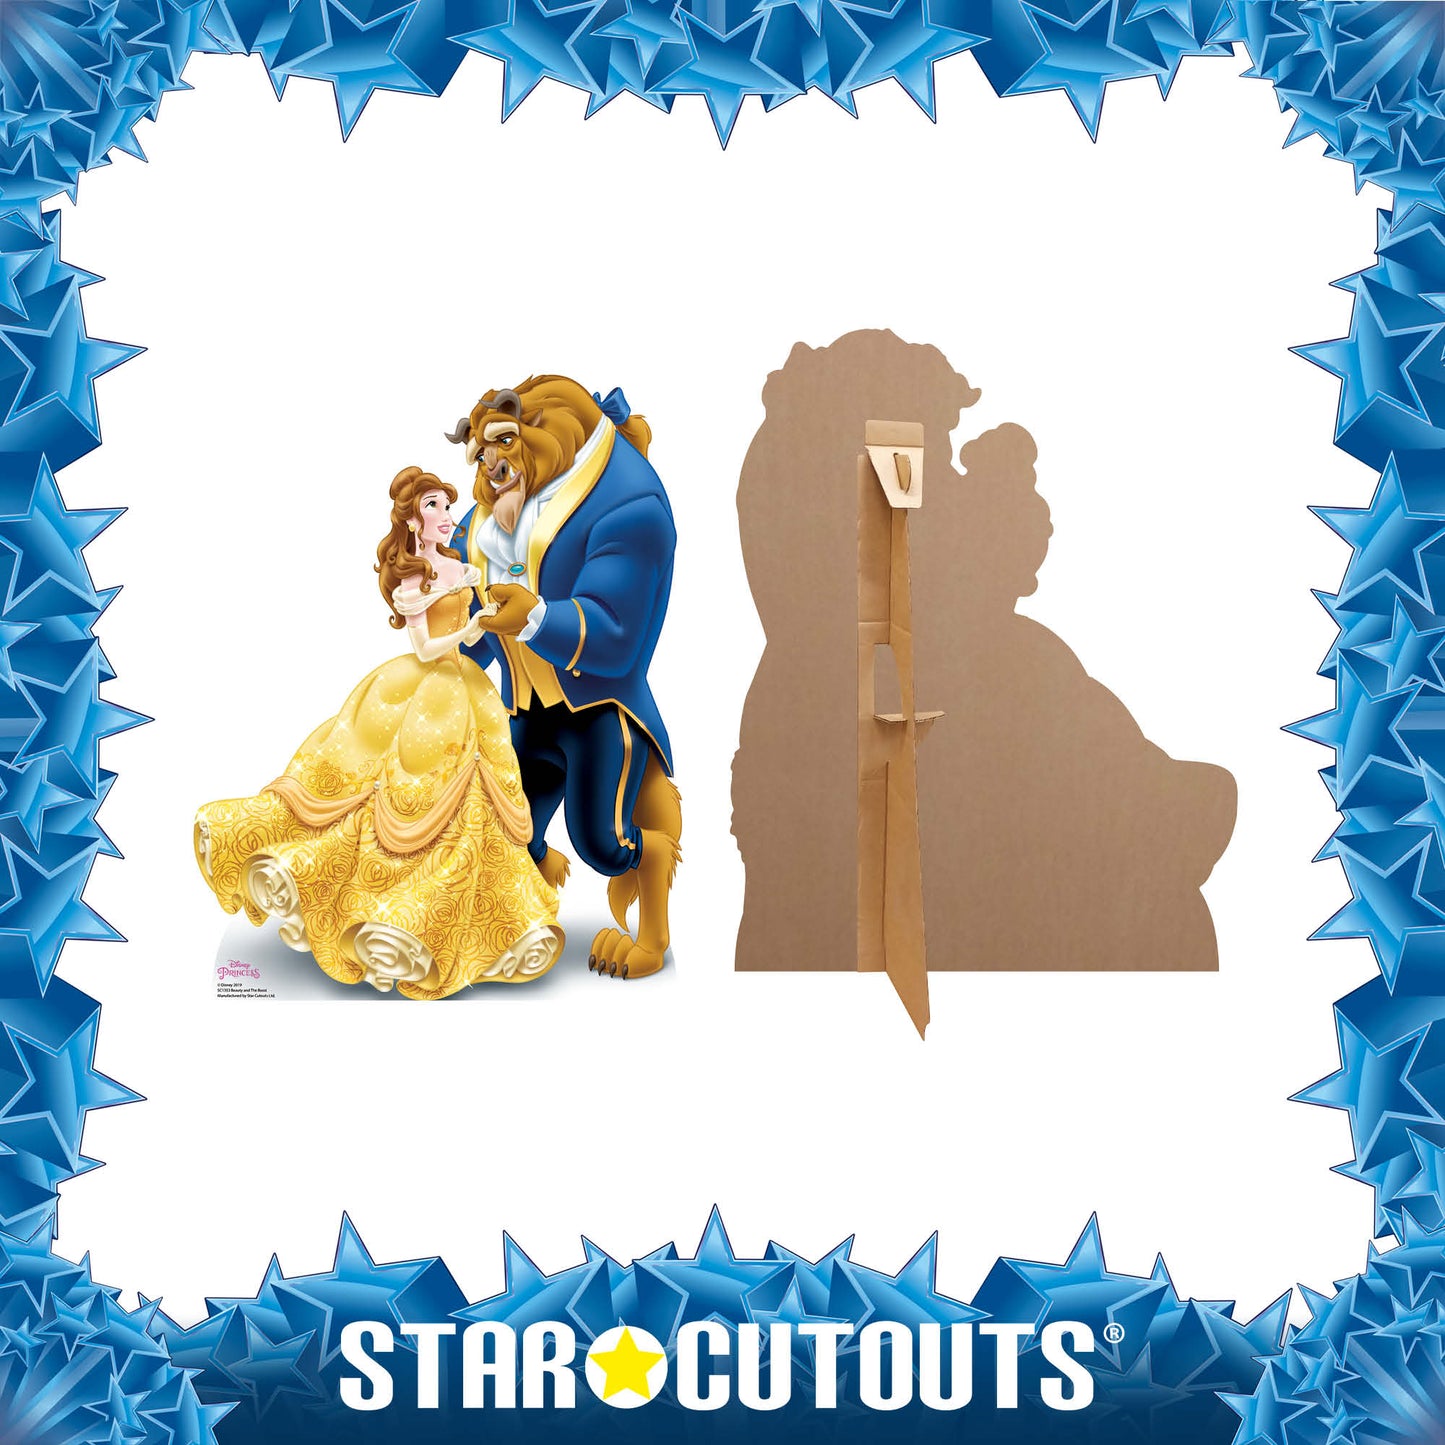 SC1353 Disney Princess Belle Beauty and The Beast Cardboard Cut Out Height 78cm